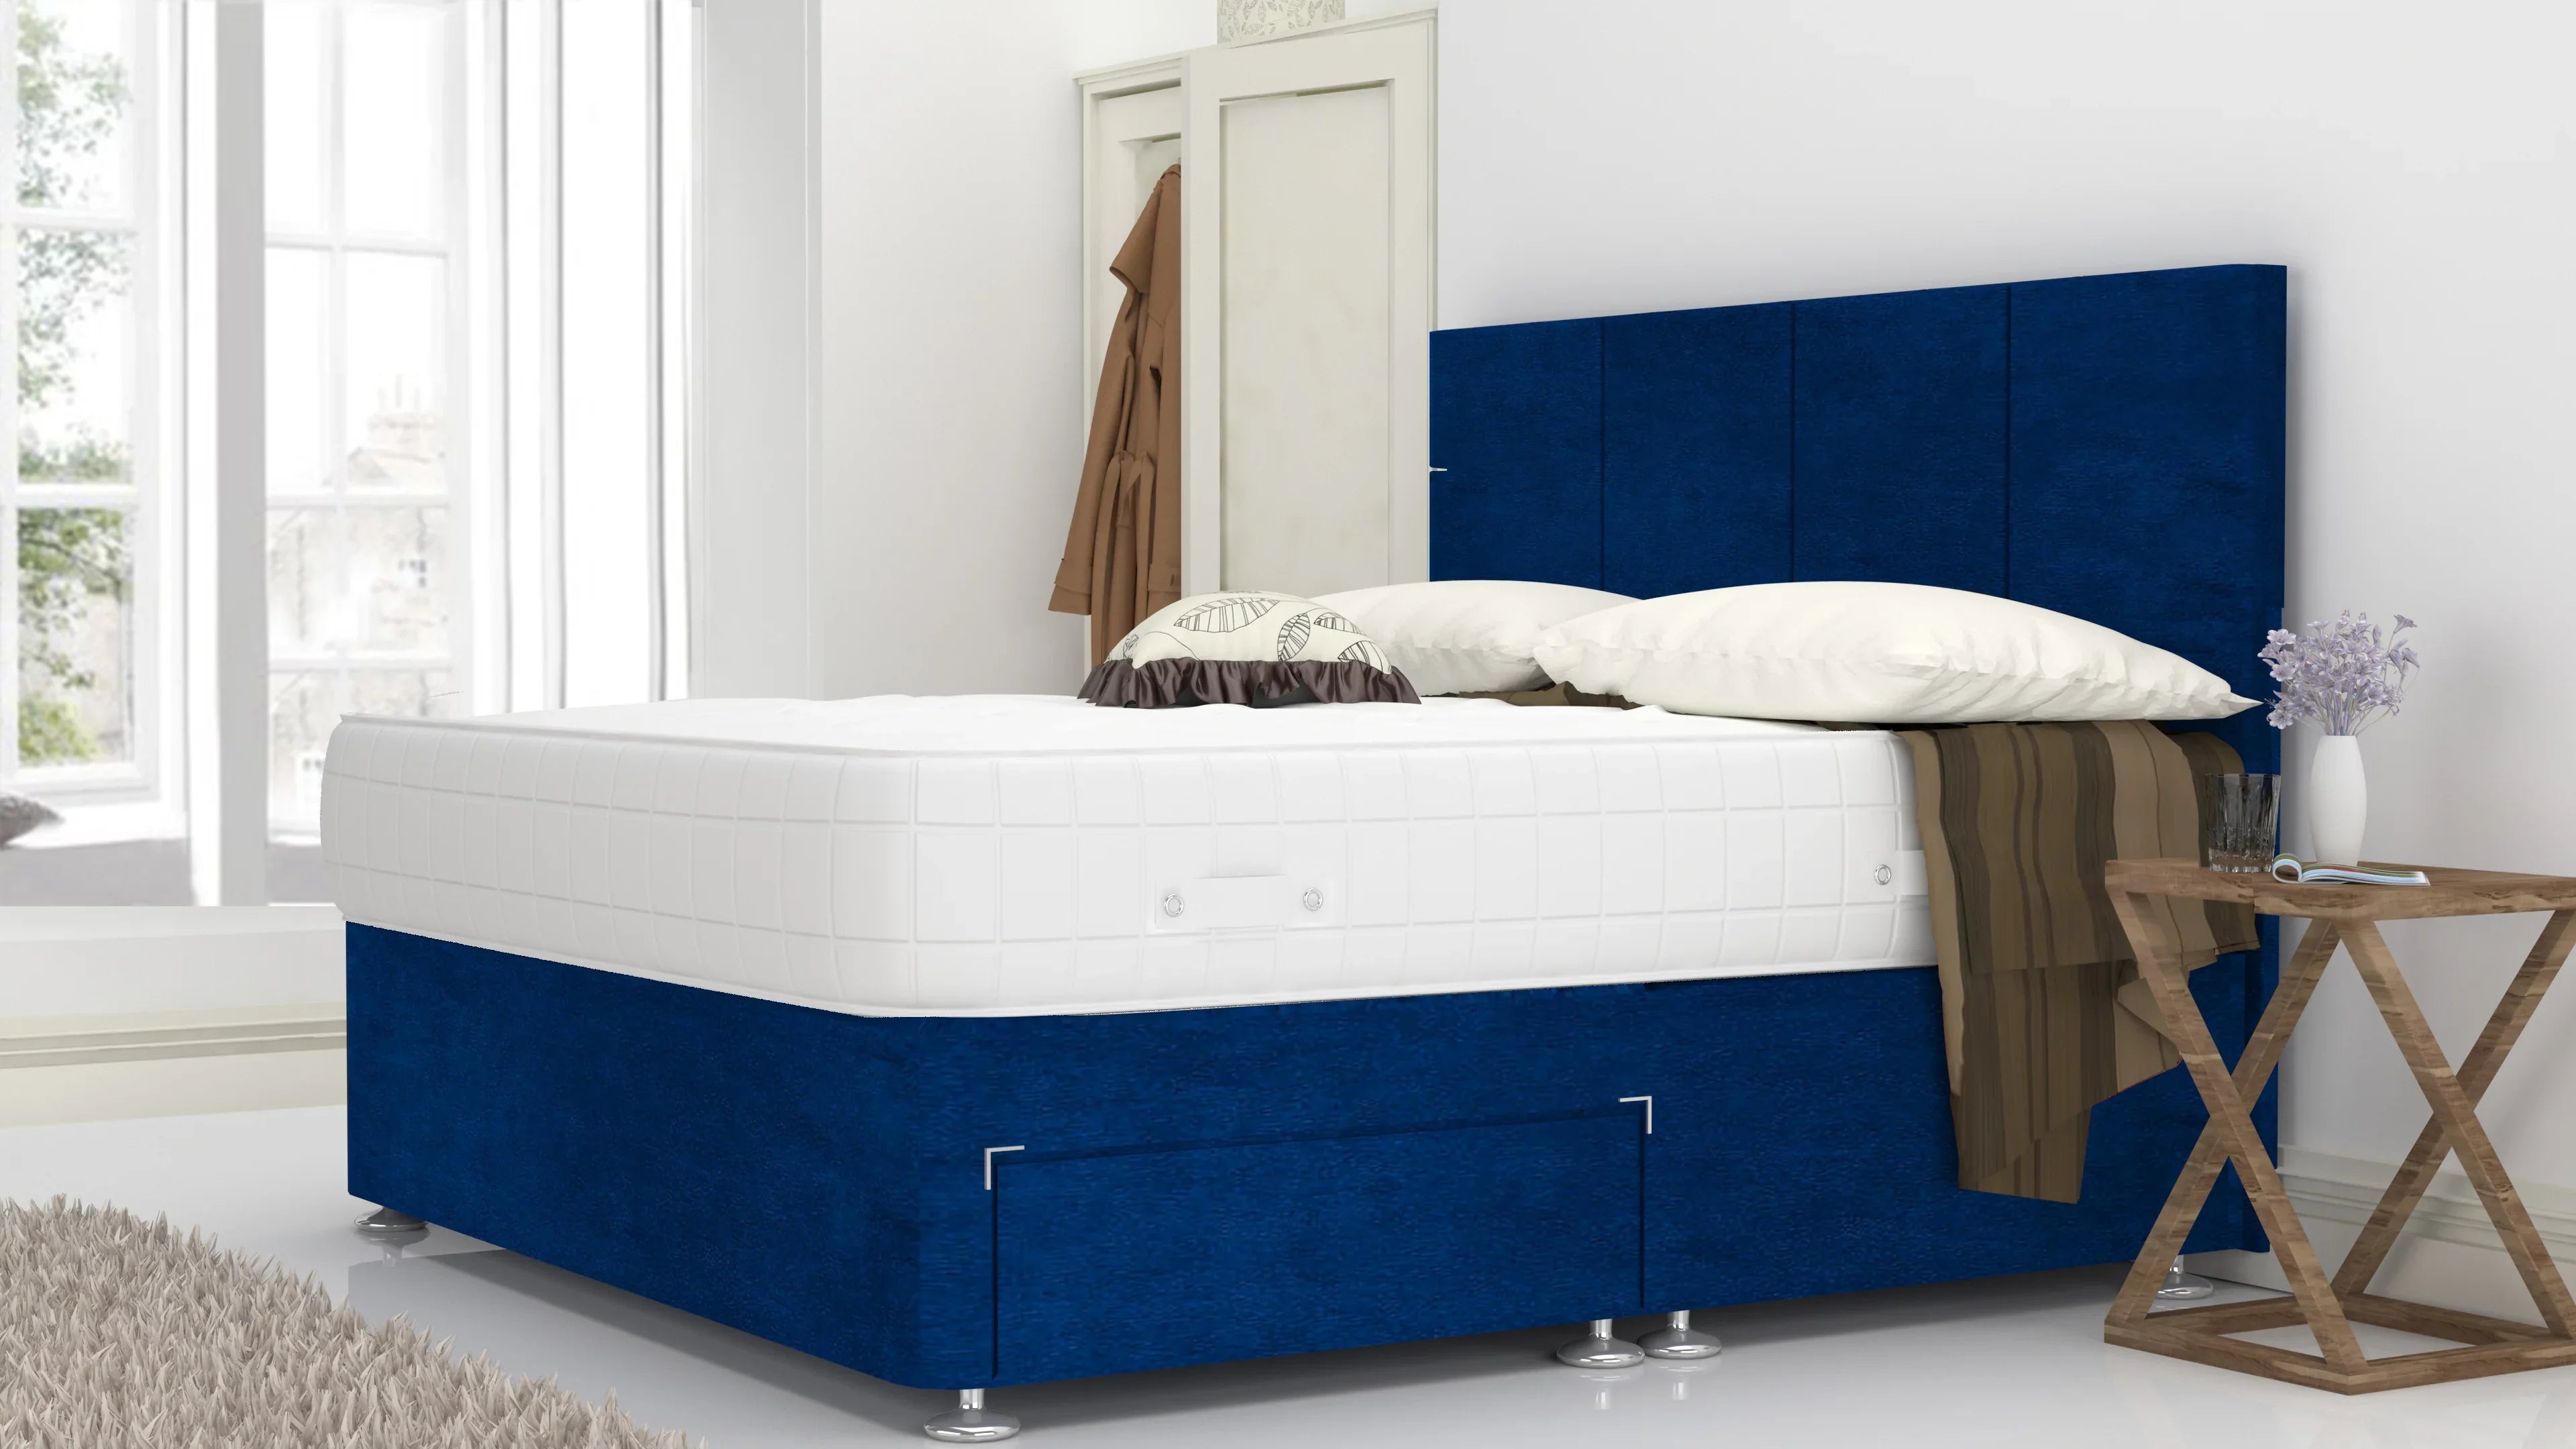 Blue Plush 6 Feet Divan Bed Set With 4 Panel Headboard (Included Feet) And Free Tinsel Top Mattress